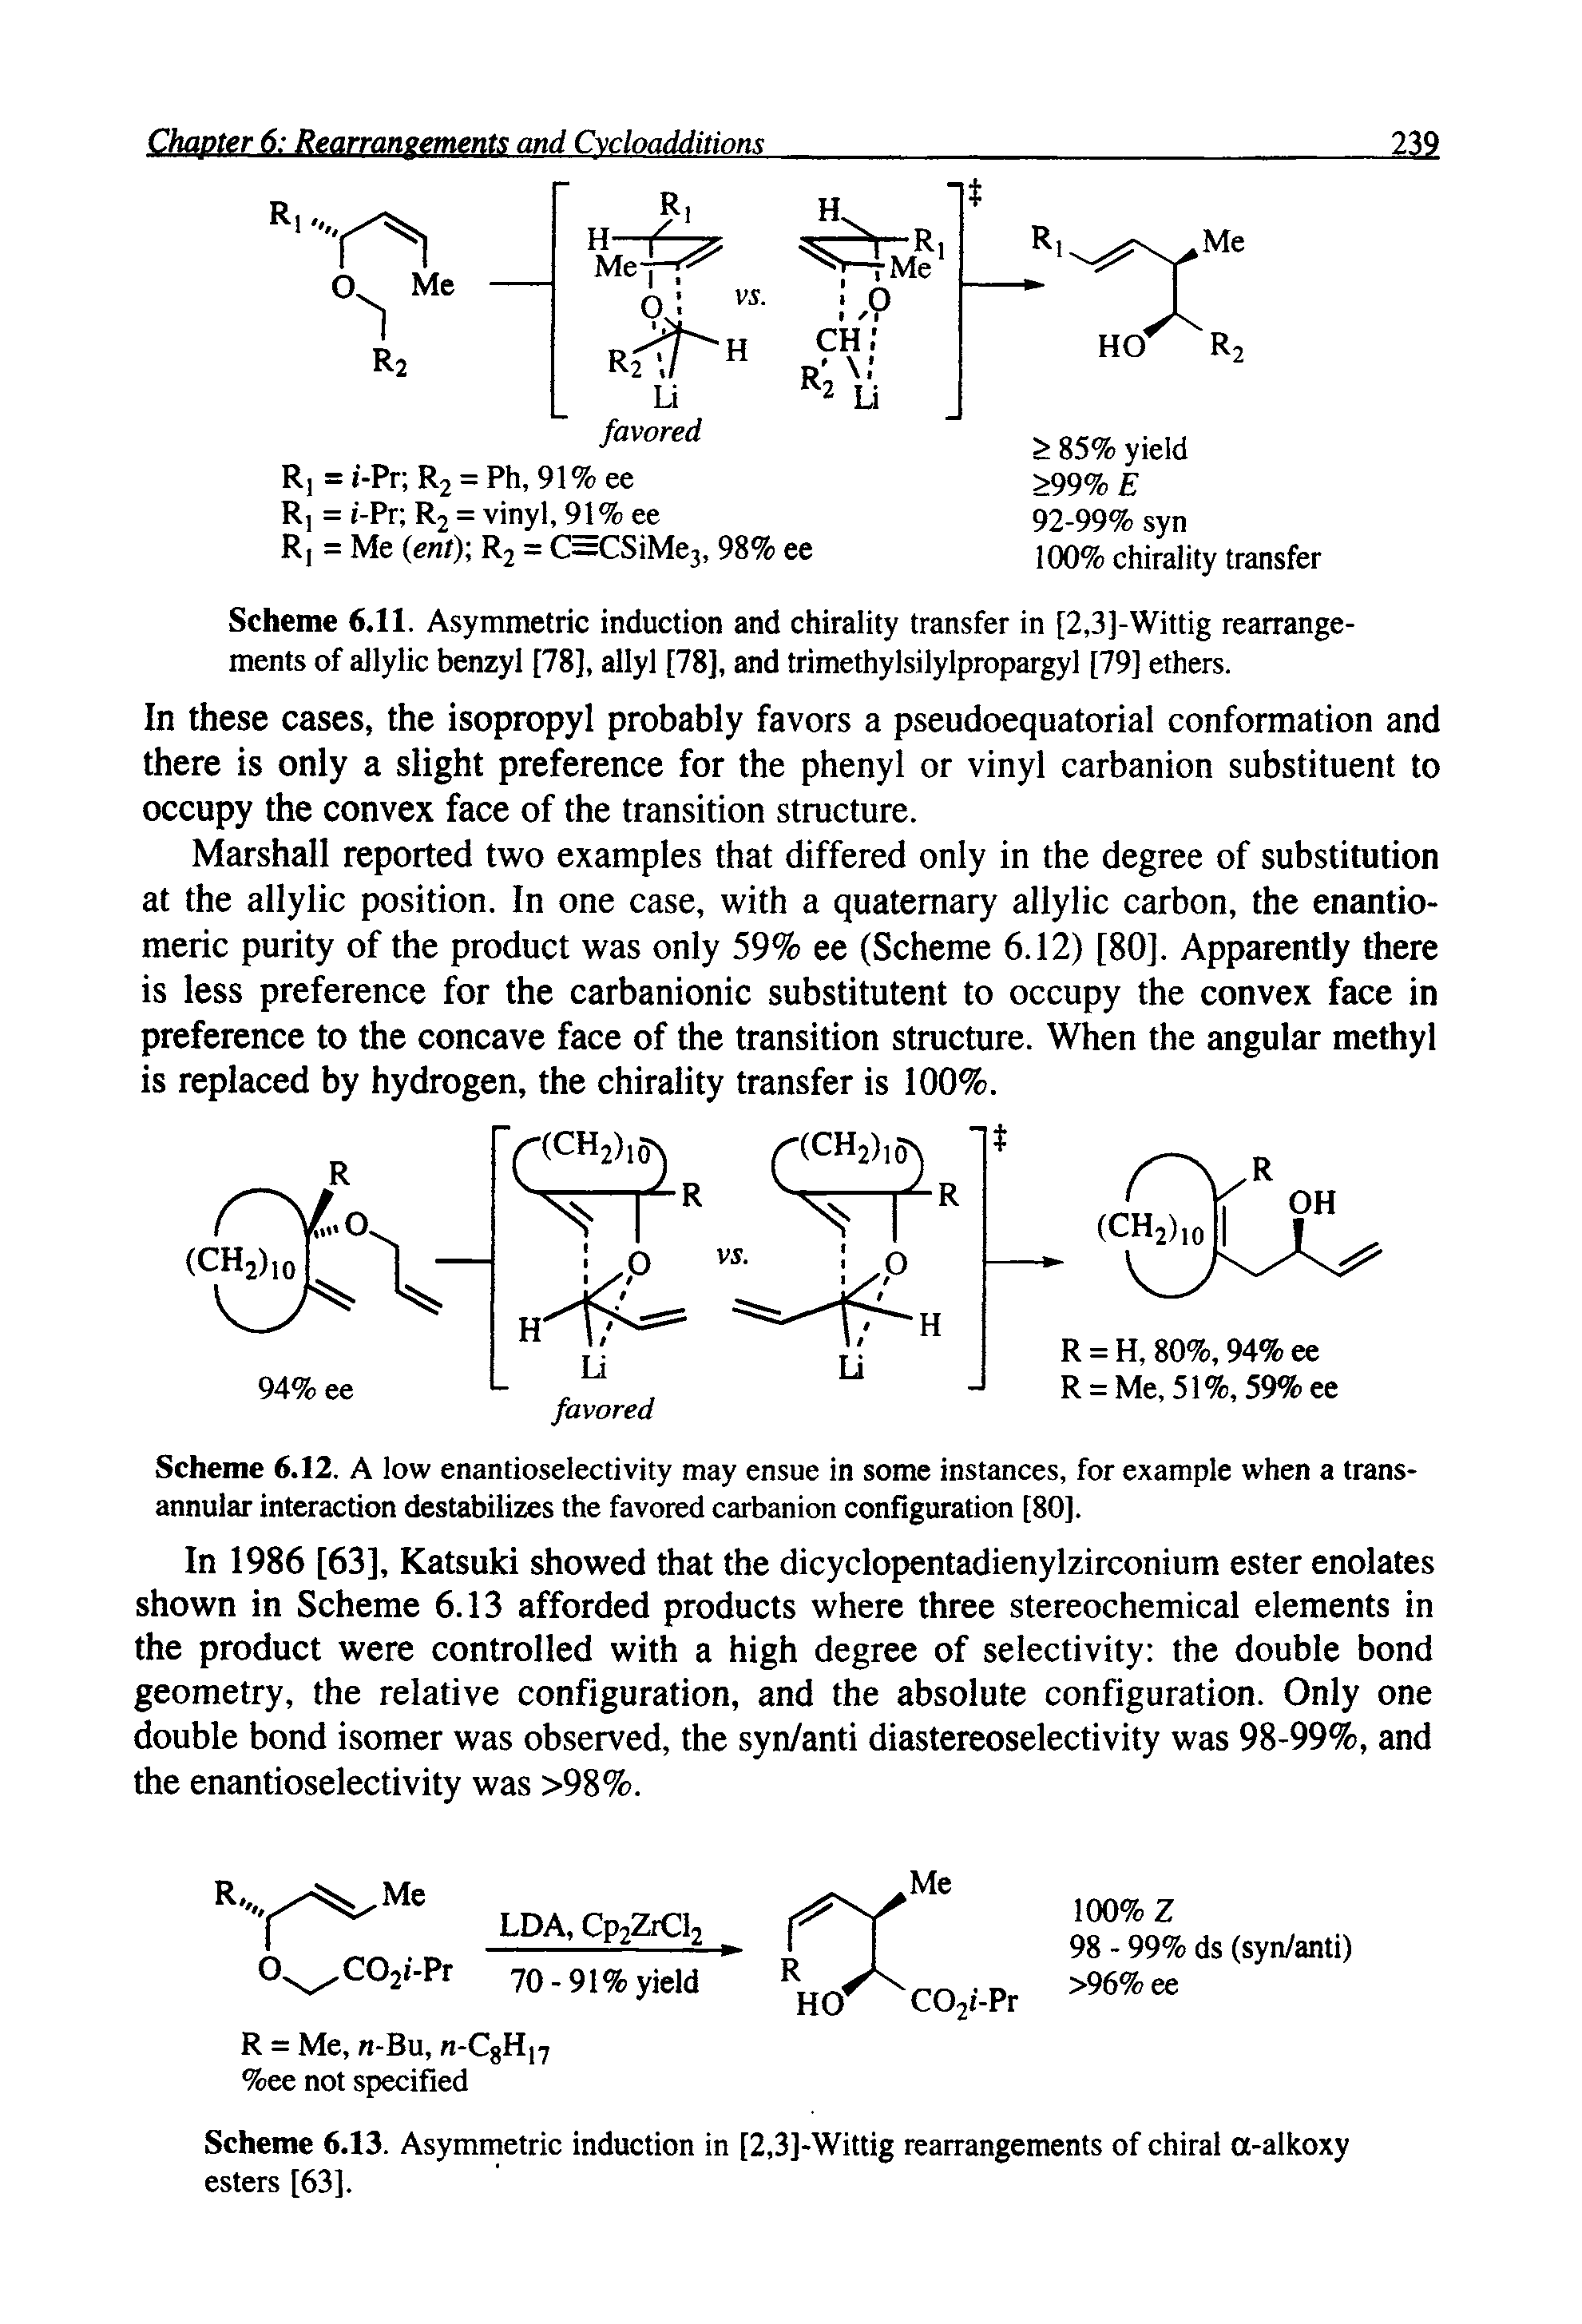 Scheme 6.11. Asymmetric induction and chirality transfer in [2,3]-Wittig rearrangements of allylic benzyl [78], ally [78], and trimethylsilylpropargyl [79] ethers.